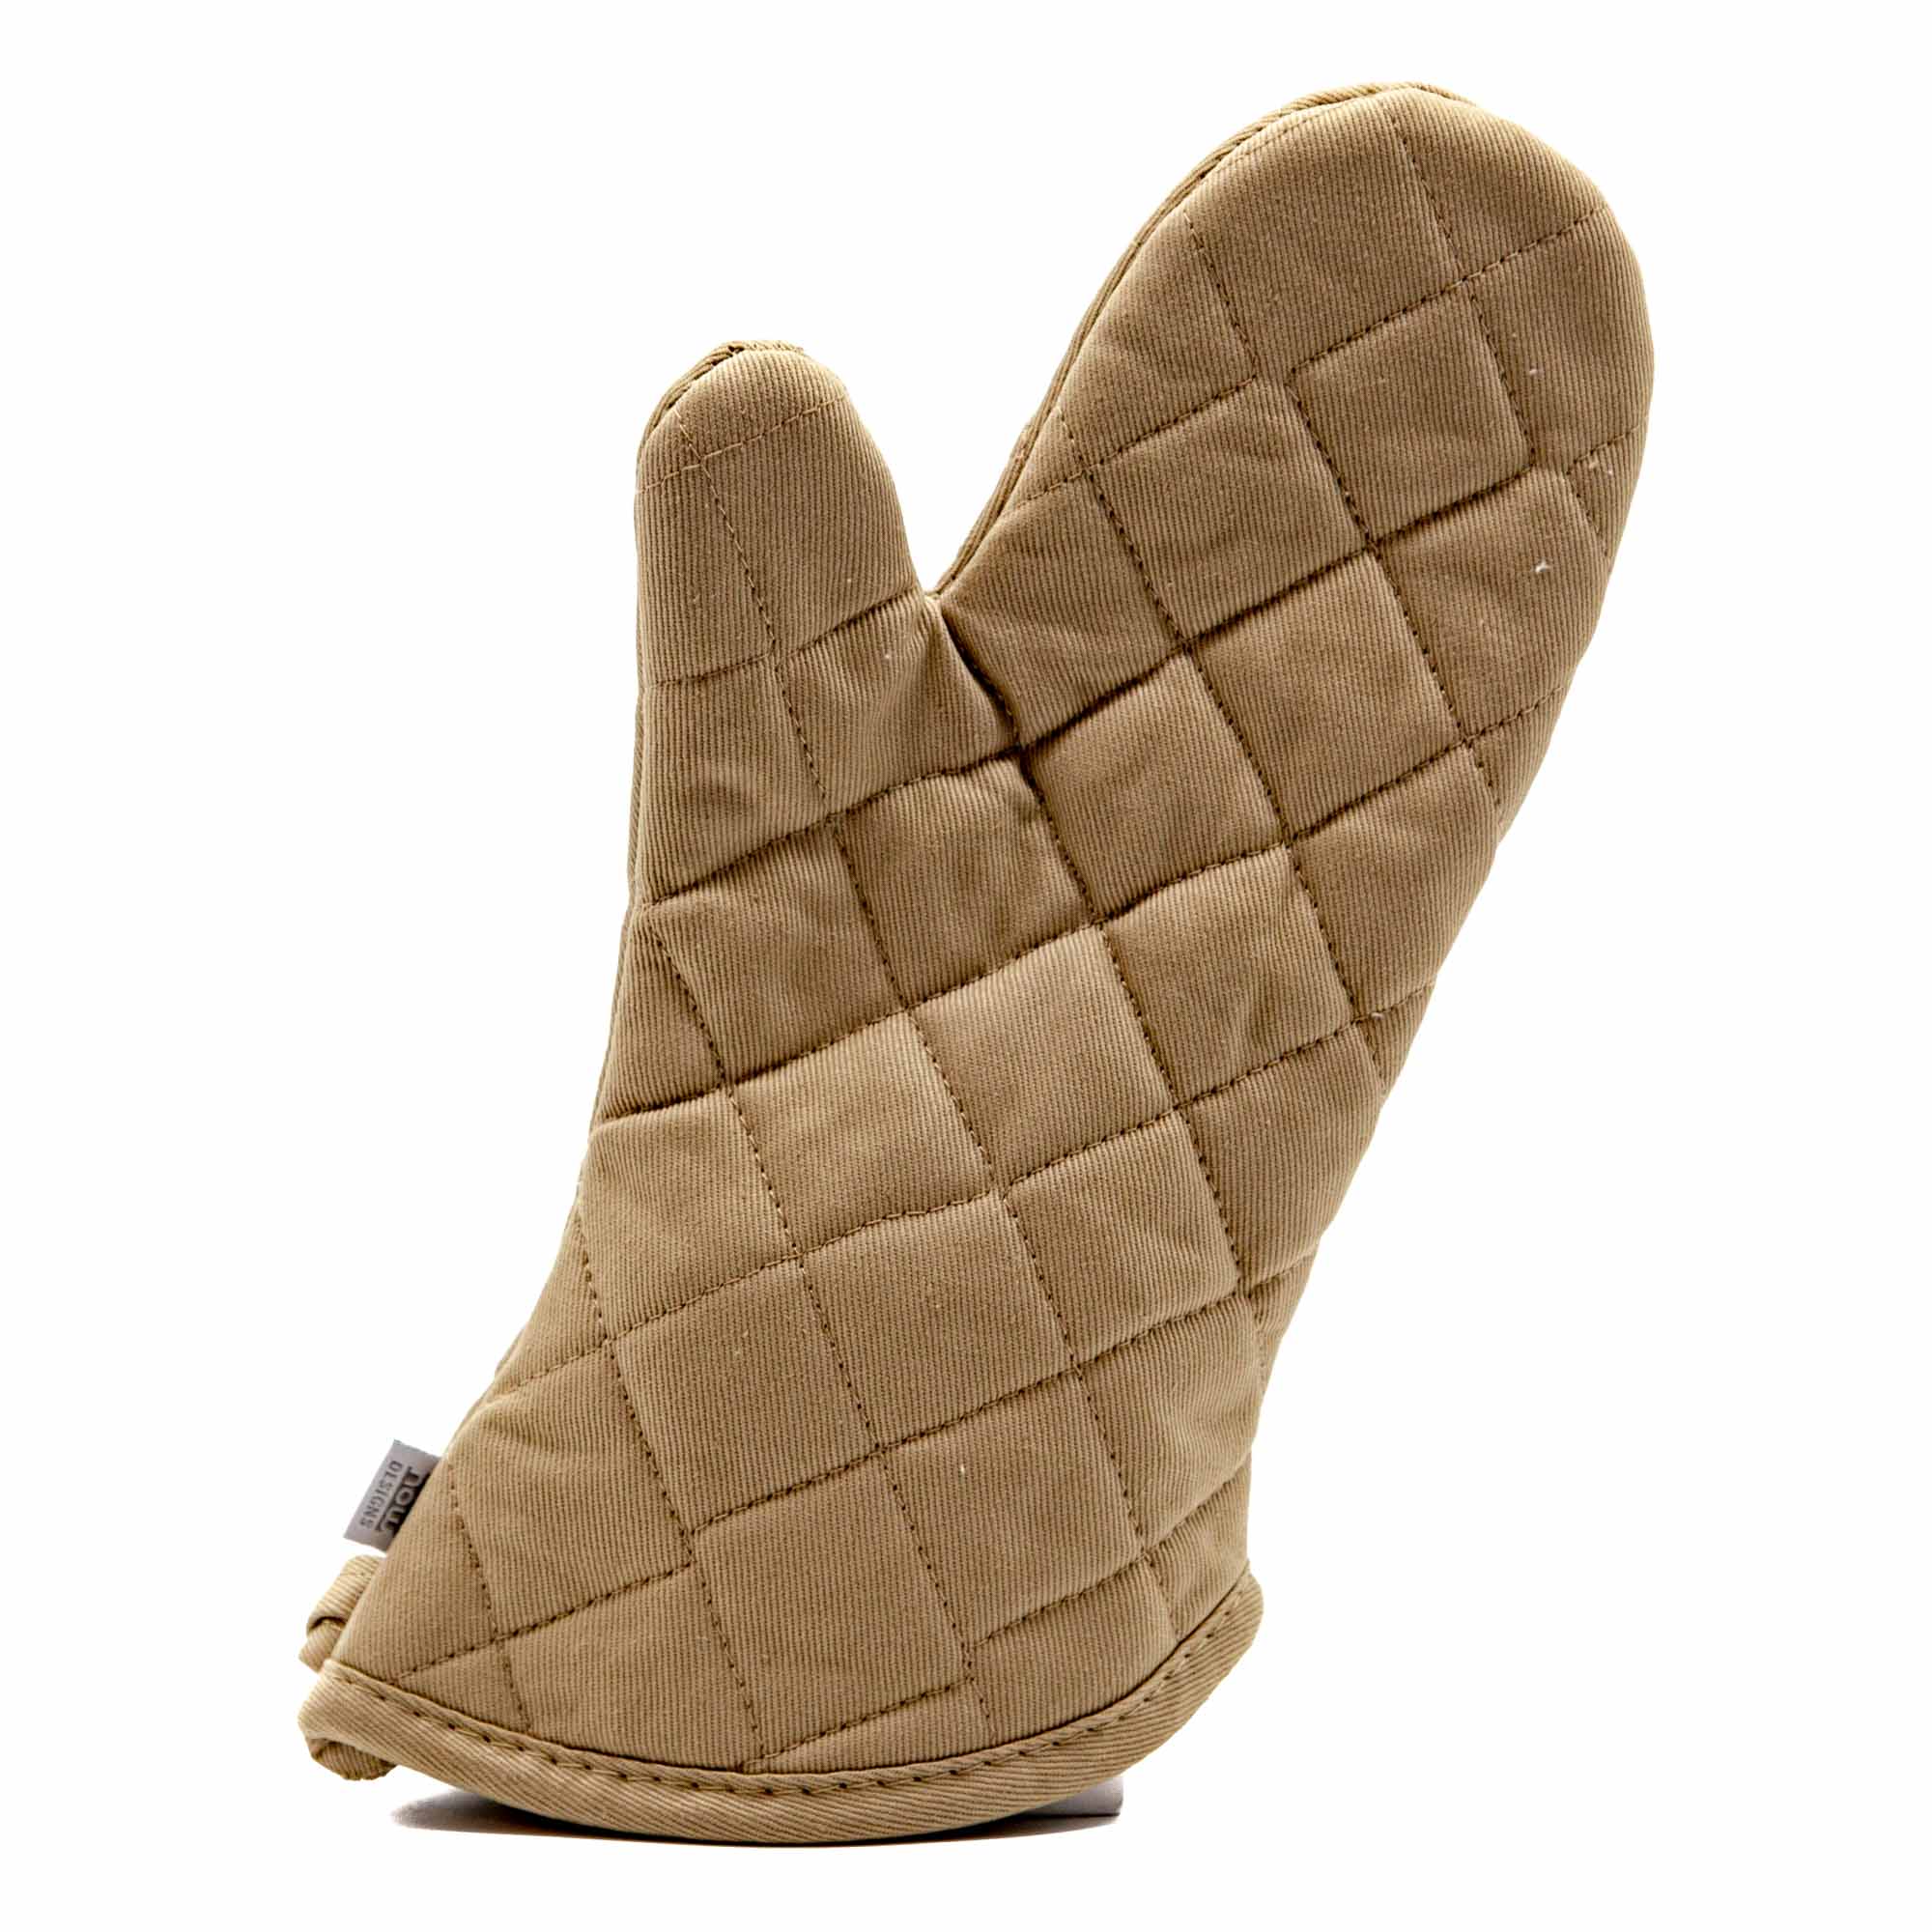 The Superior Oven Mitt - Mortise And Tenon